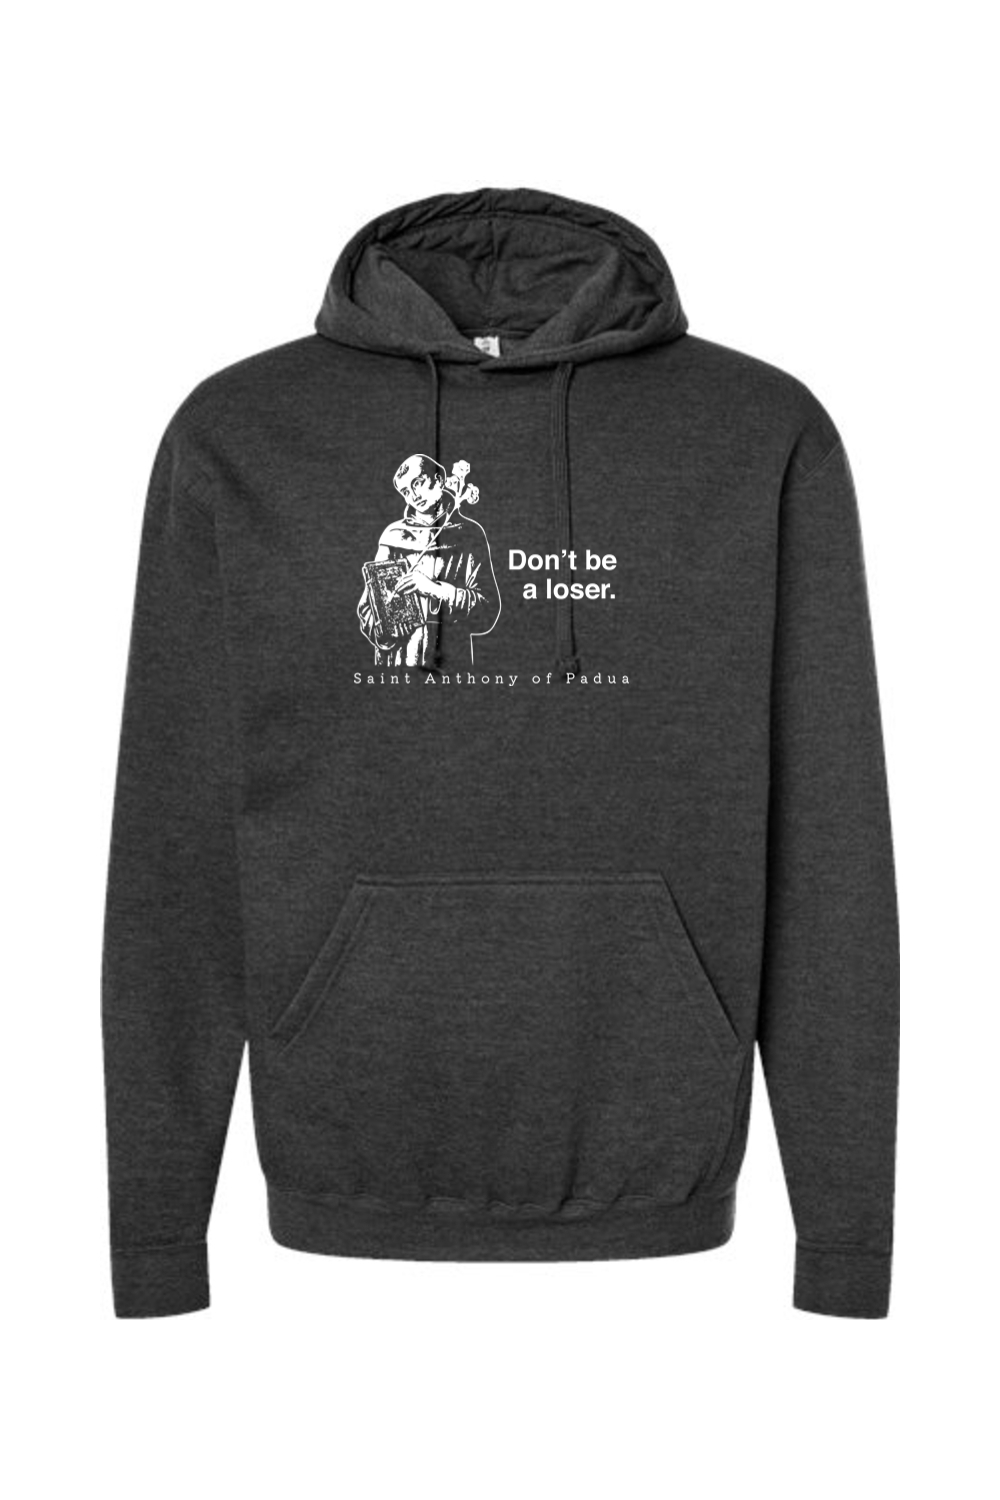 Don't Be a Loser - St. Anthony of Padua Hoodie Sweatshirt